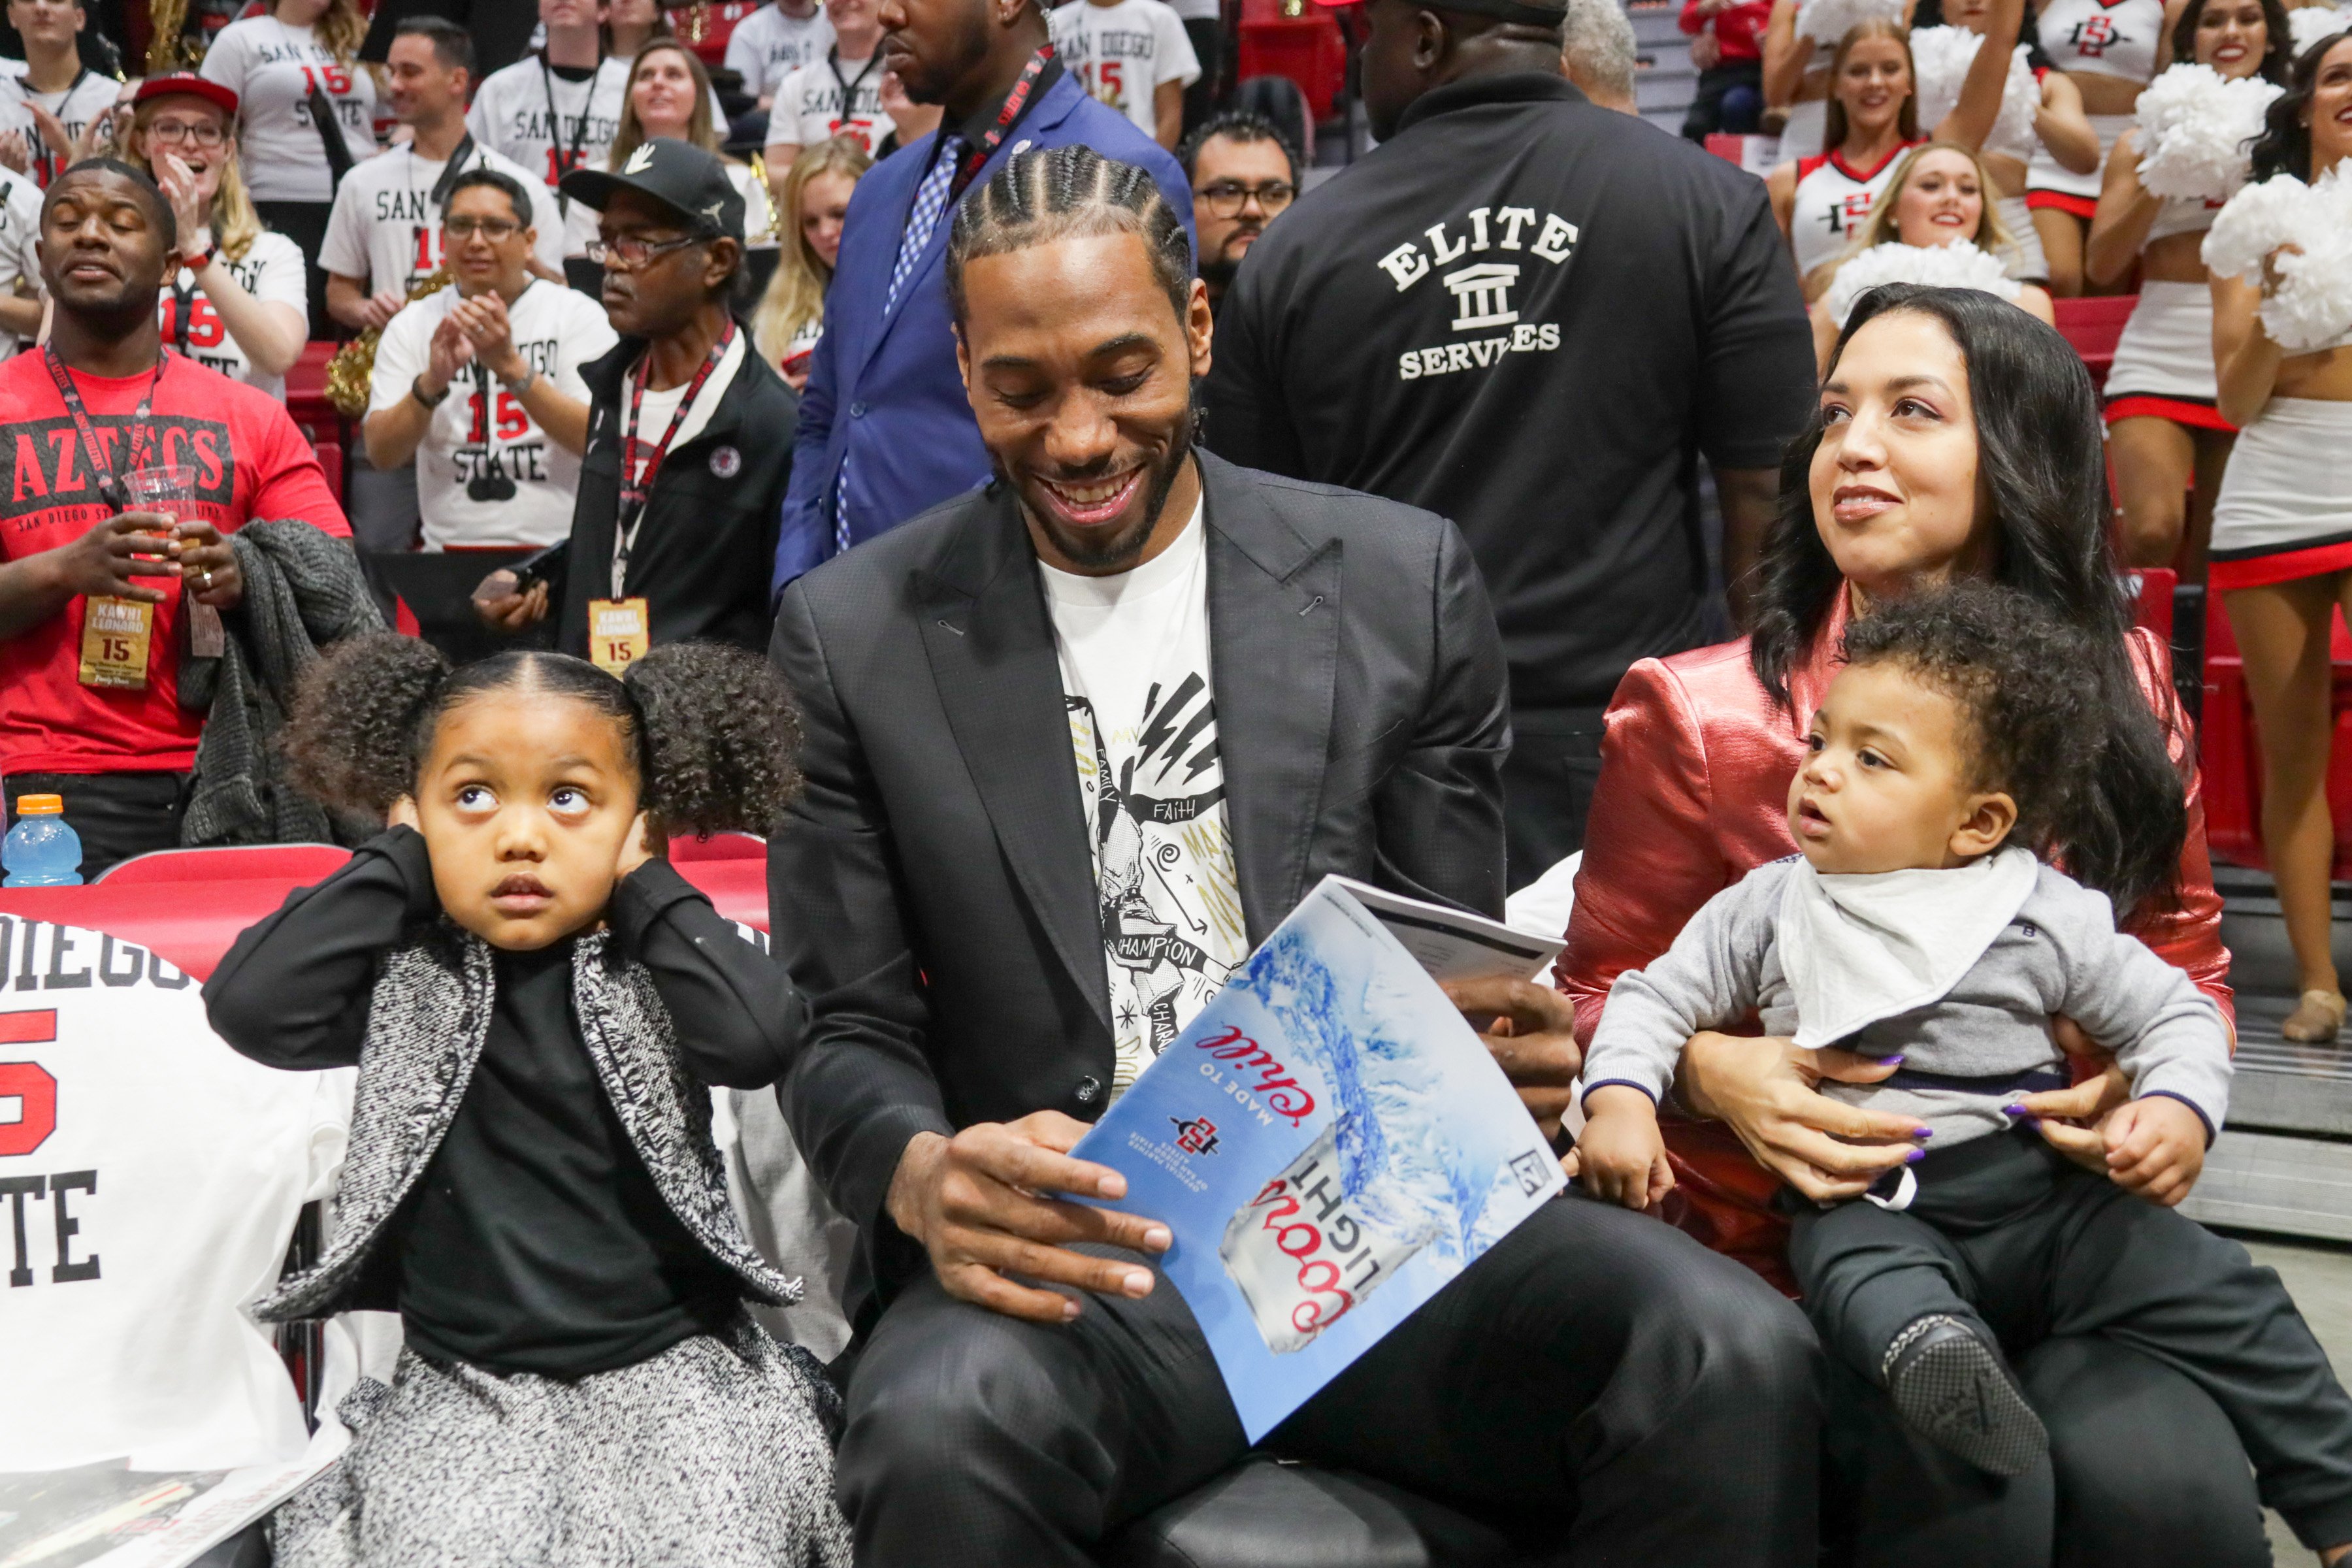 Kawhi Leonard sits with his family during the first half of the game against the Utah State Aggies at Viejas Arena, on February 1, 2020, in San Diego, California. | Source: Getty Images